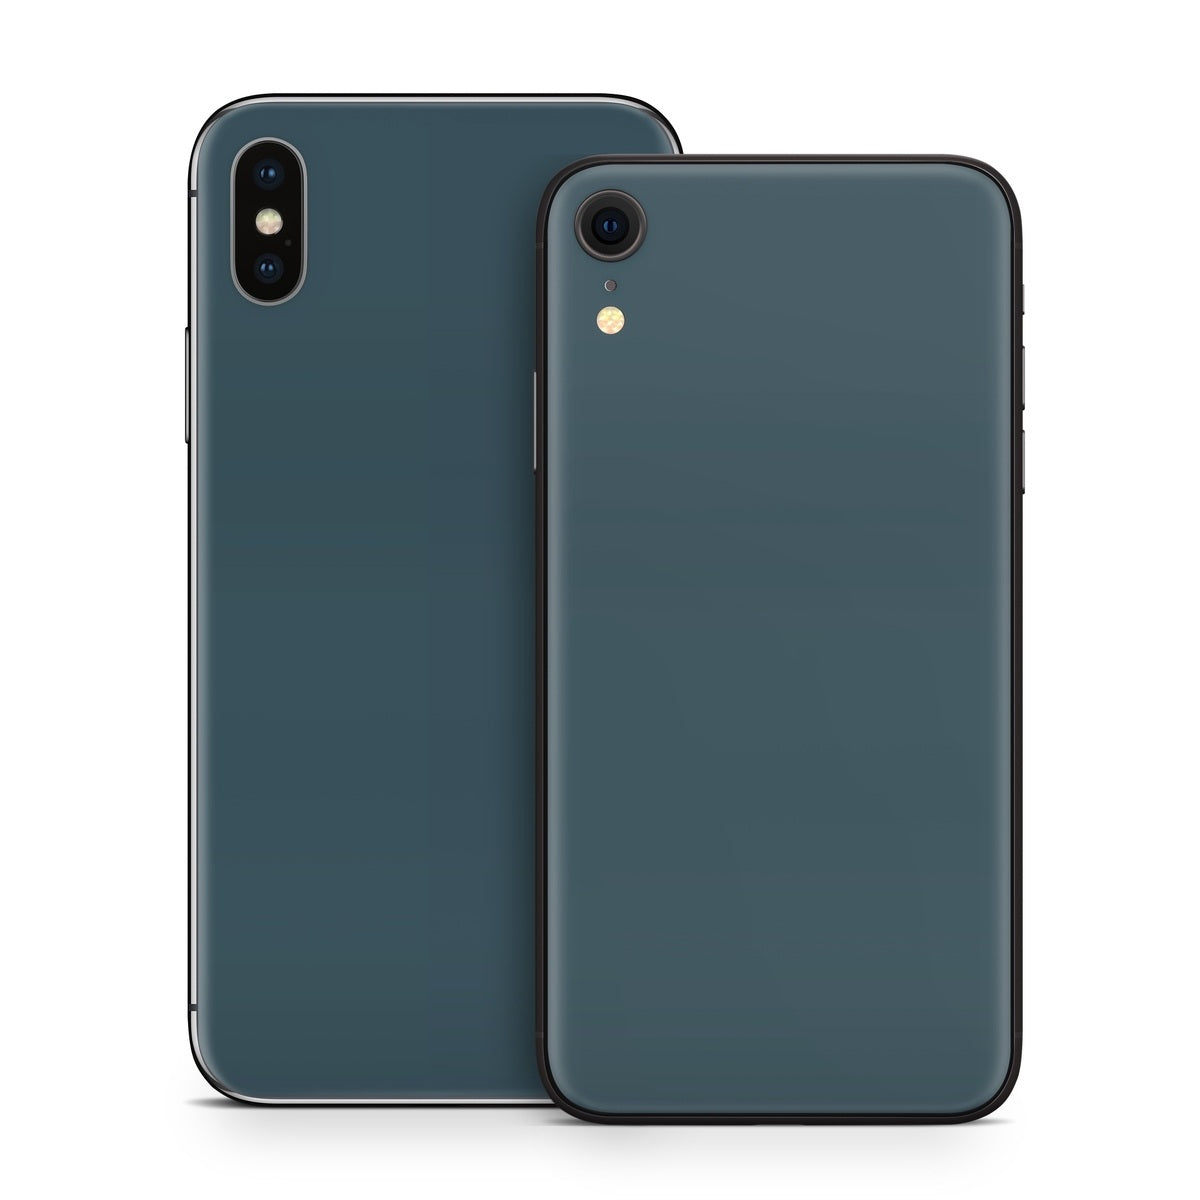 Solid State Storm - Apple iPhone X Skin